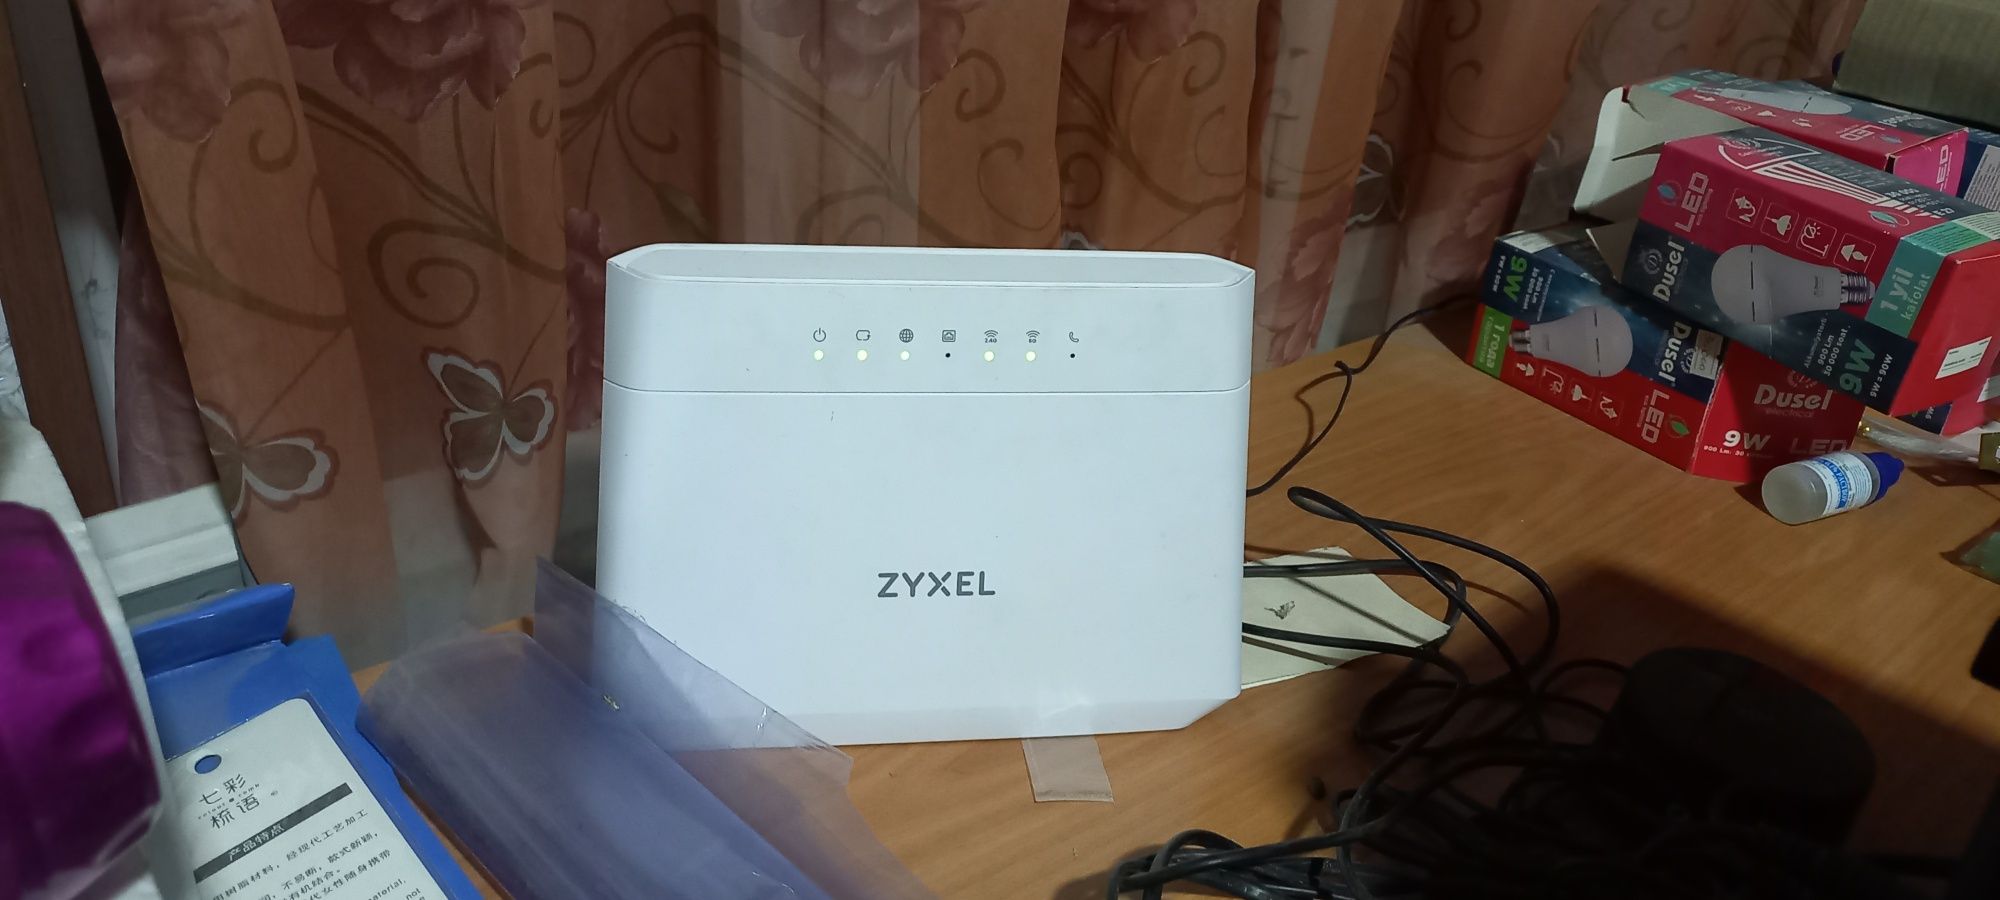 Zyhel wi fi router